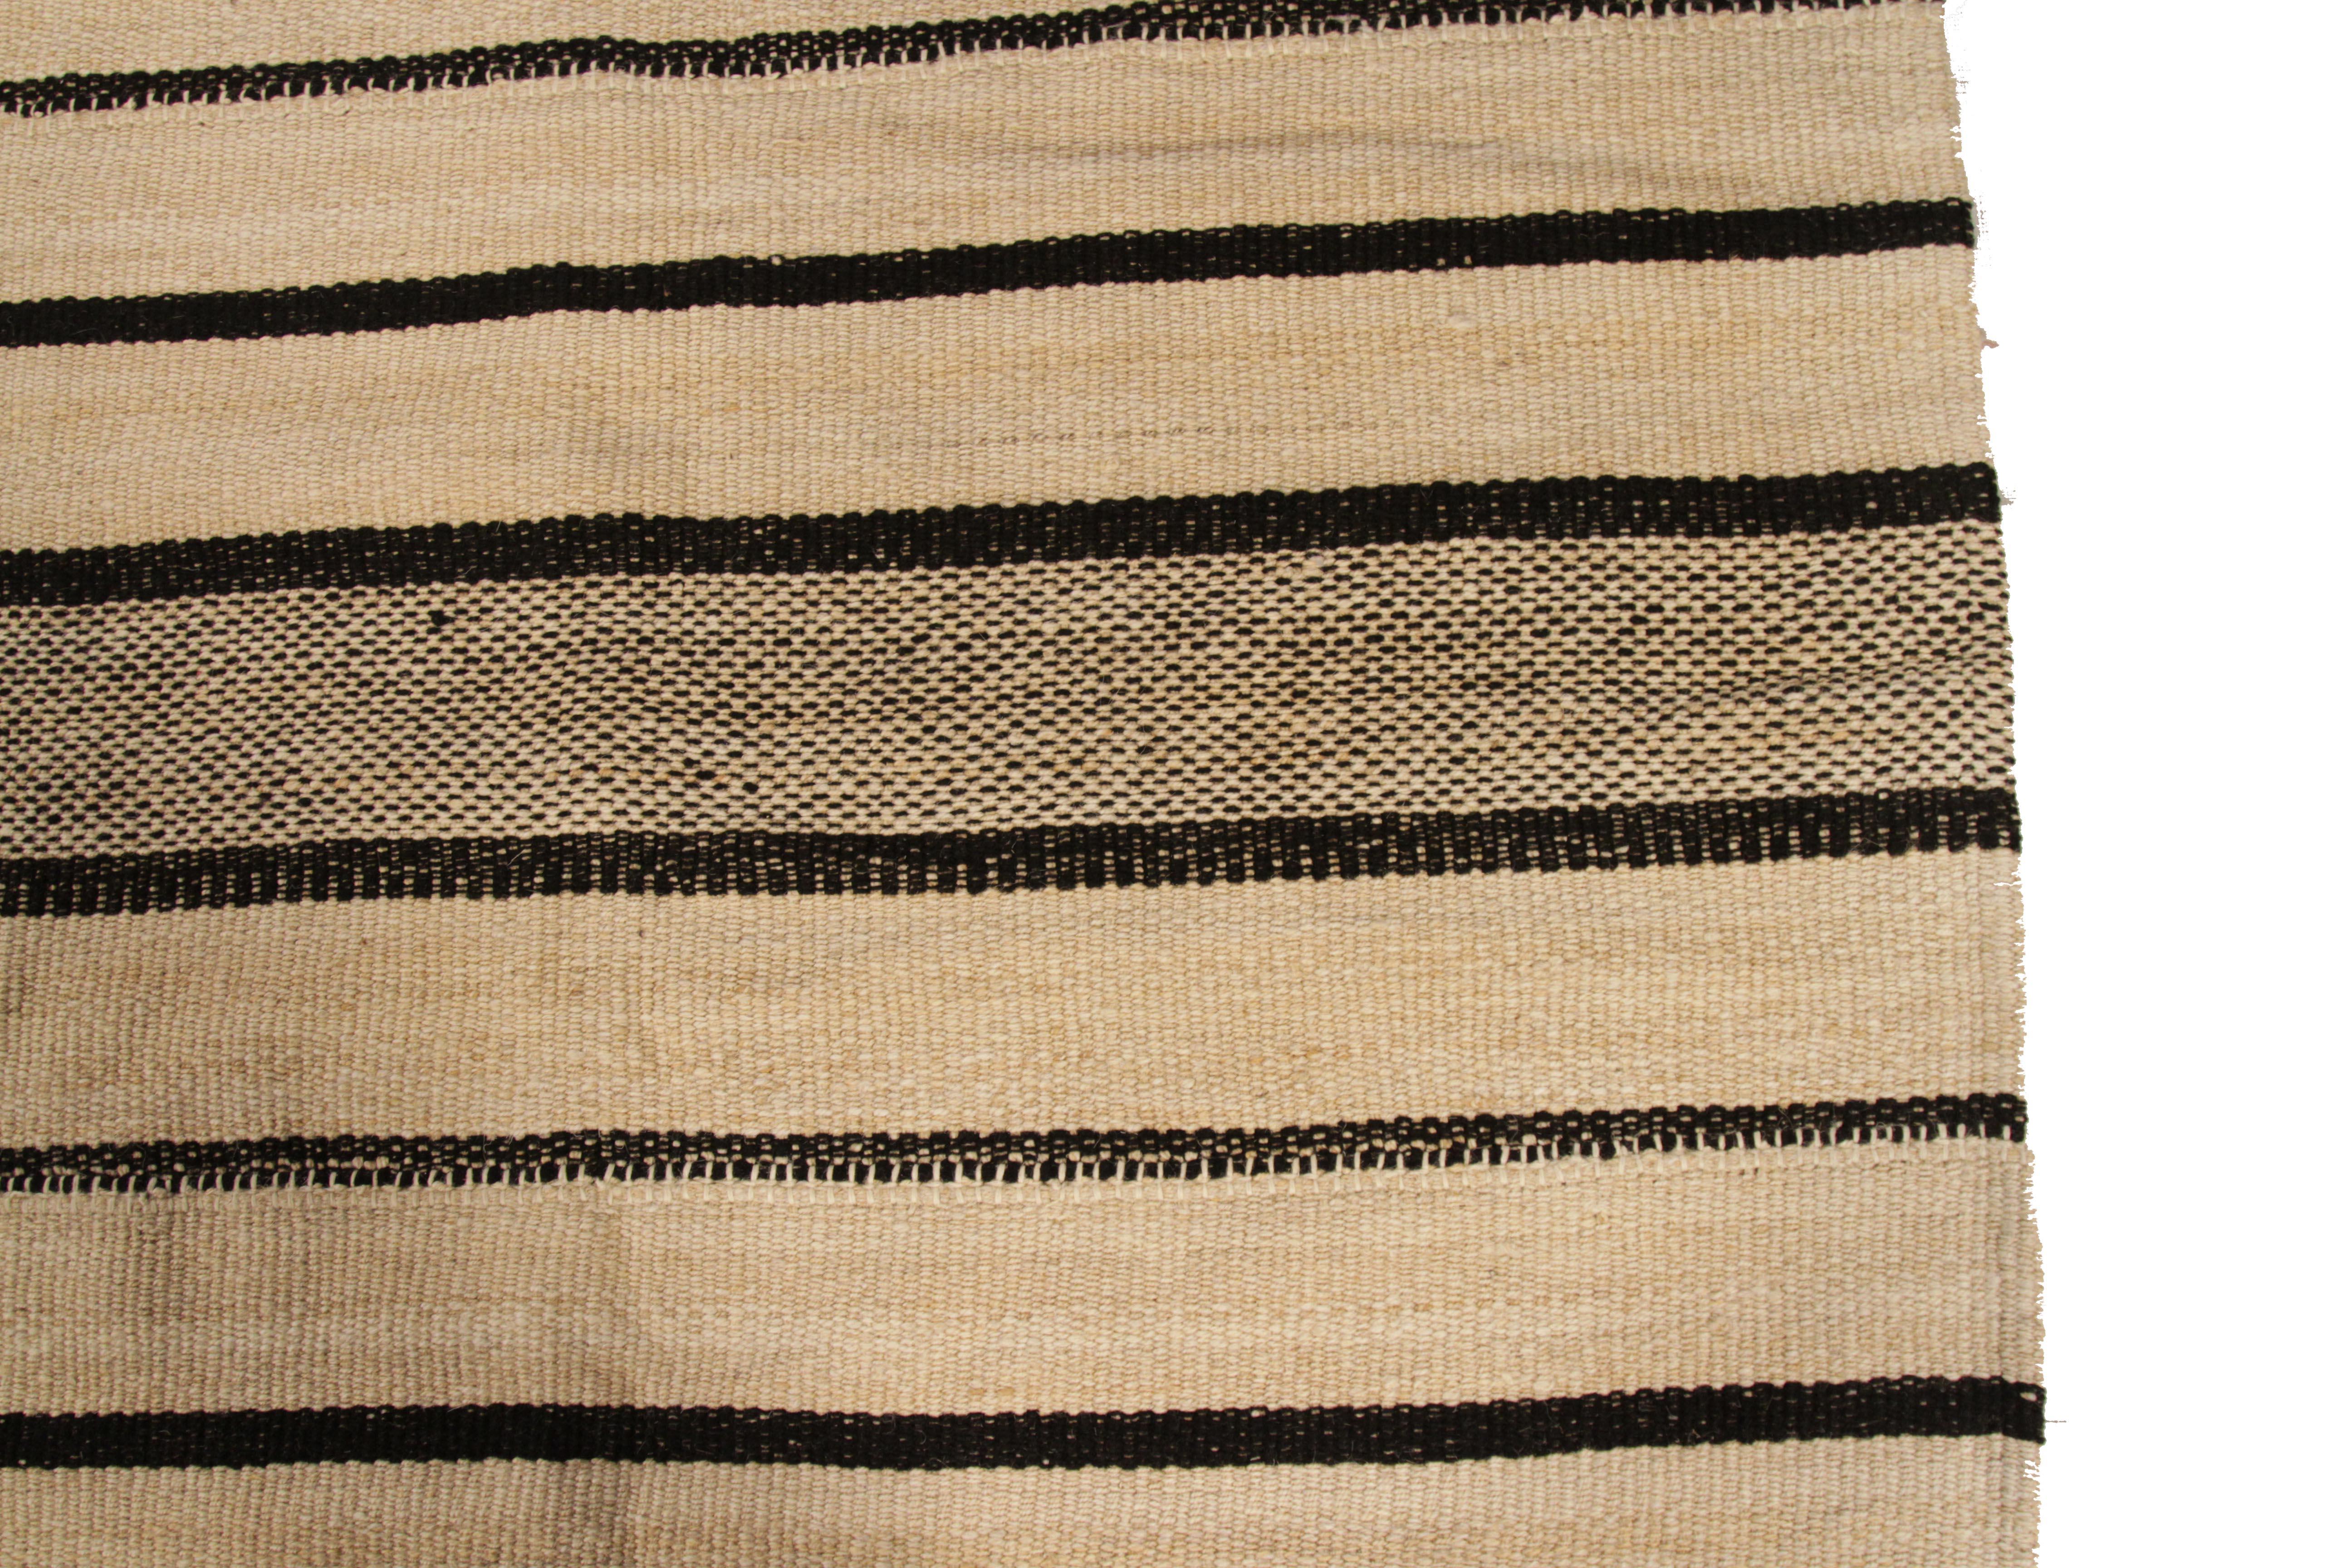 Hand-Woven New Kilim Persian Rug with Thick and Thin Stripes in Black and Beige For Sale